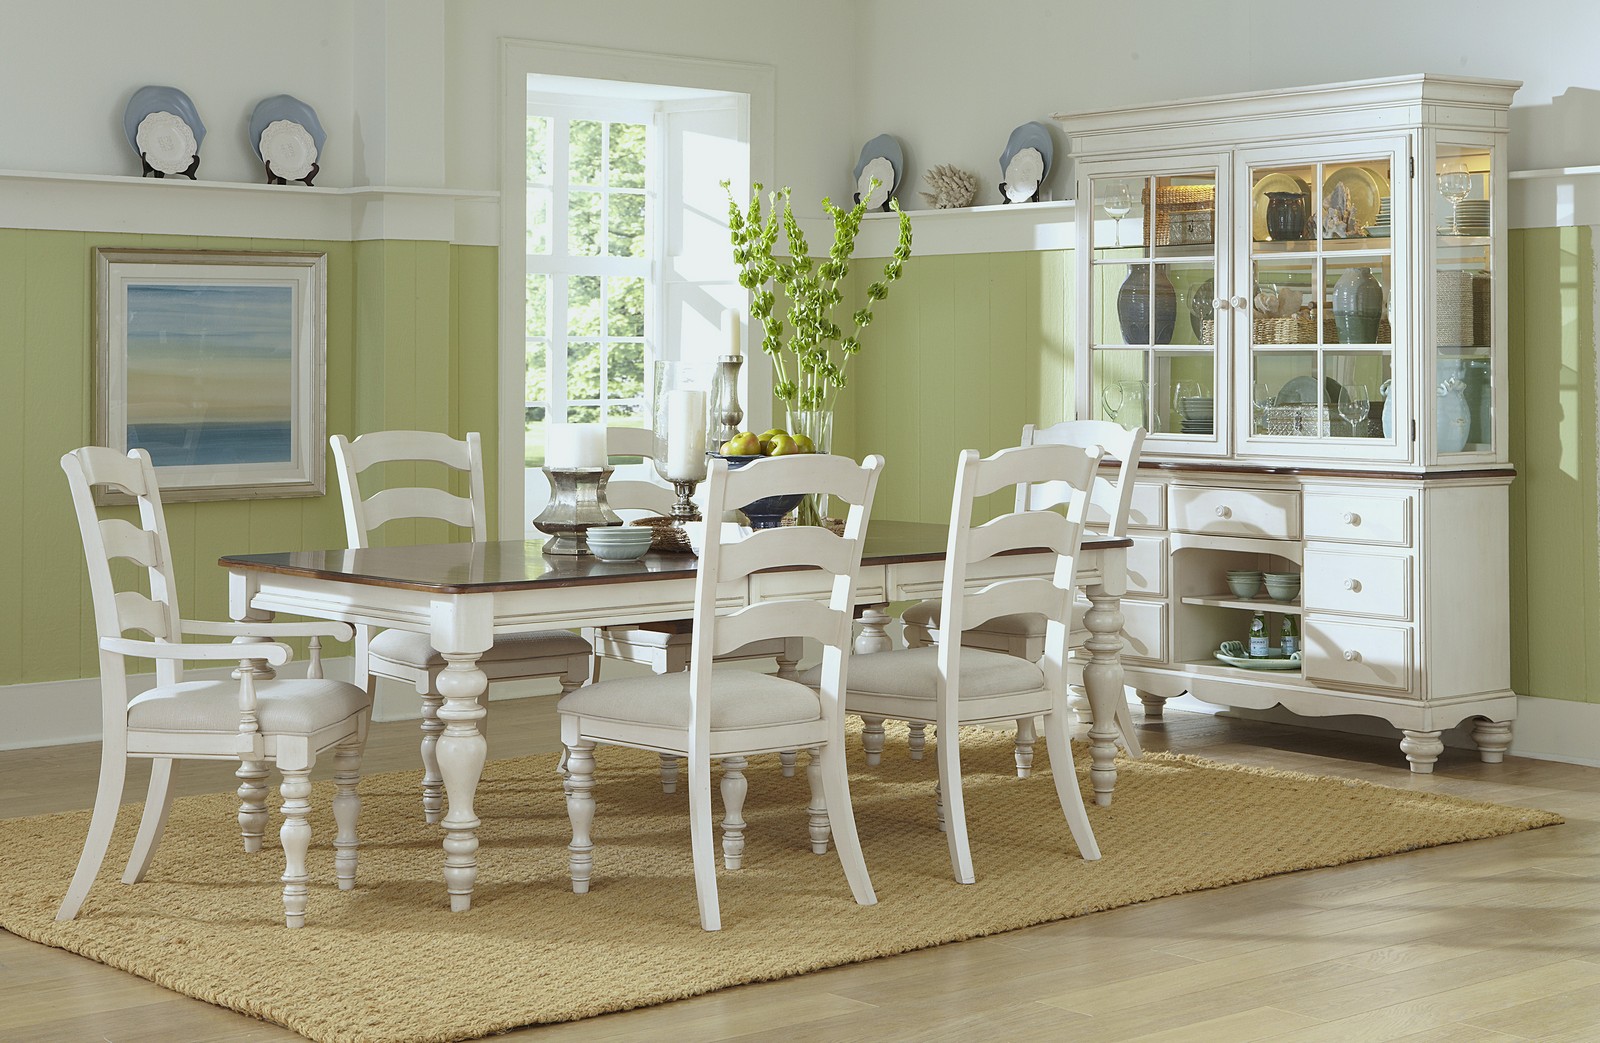 Hillsdale Pine Island 7 PC Dining Set with Ladder Back Chairs - Old White